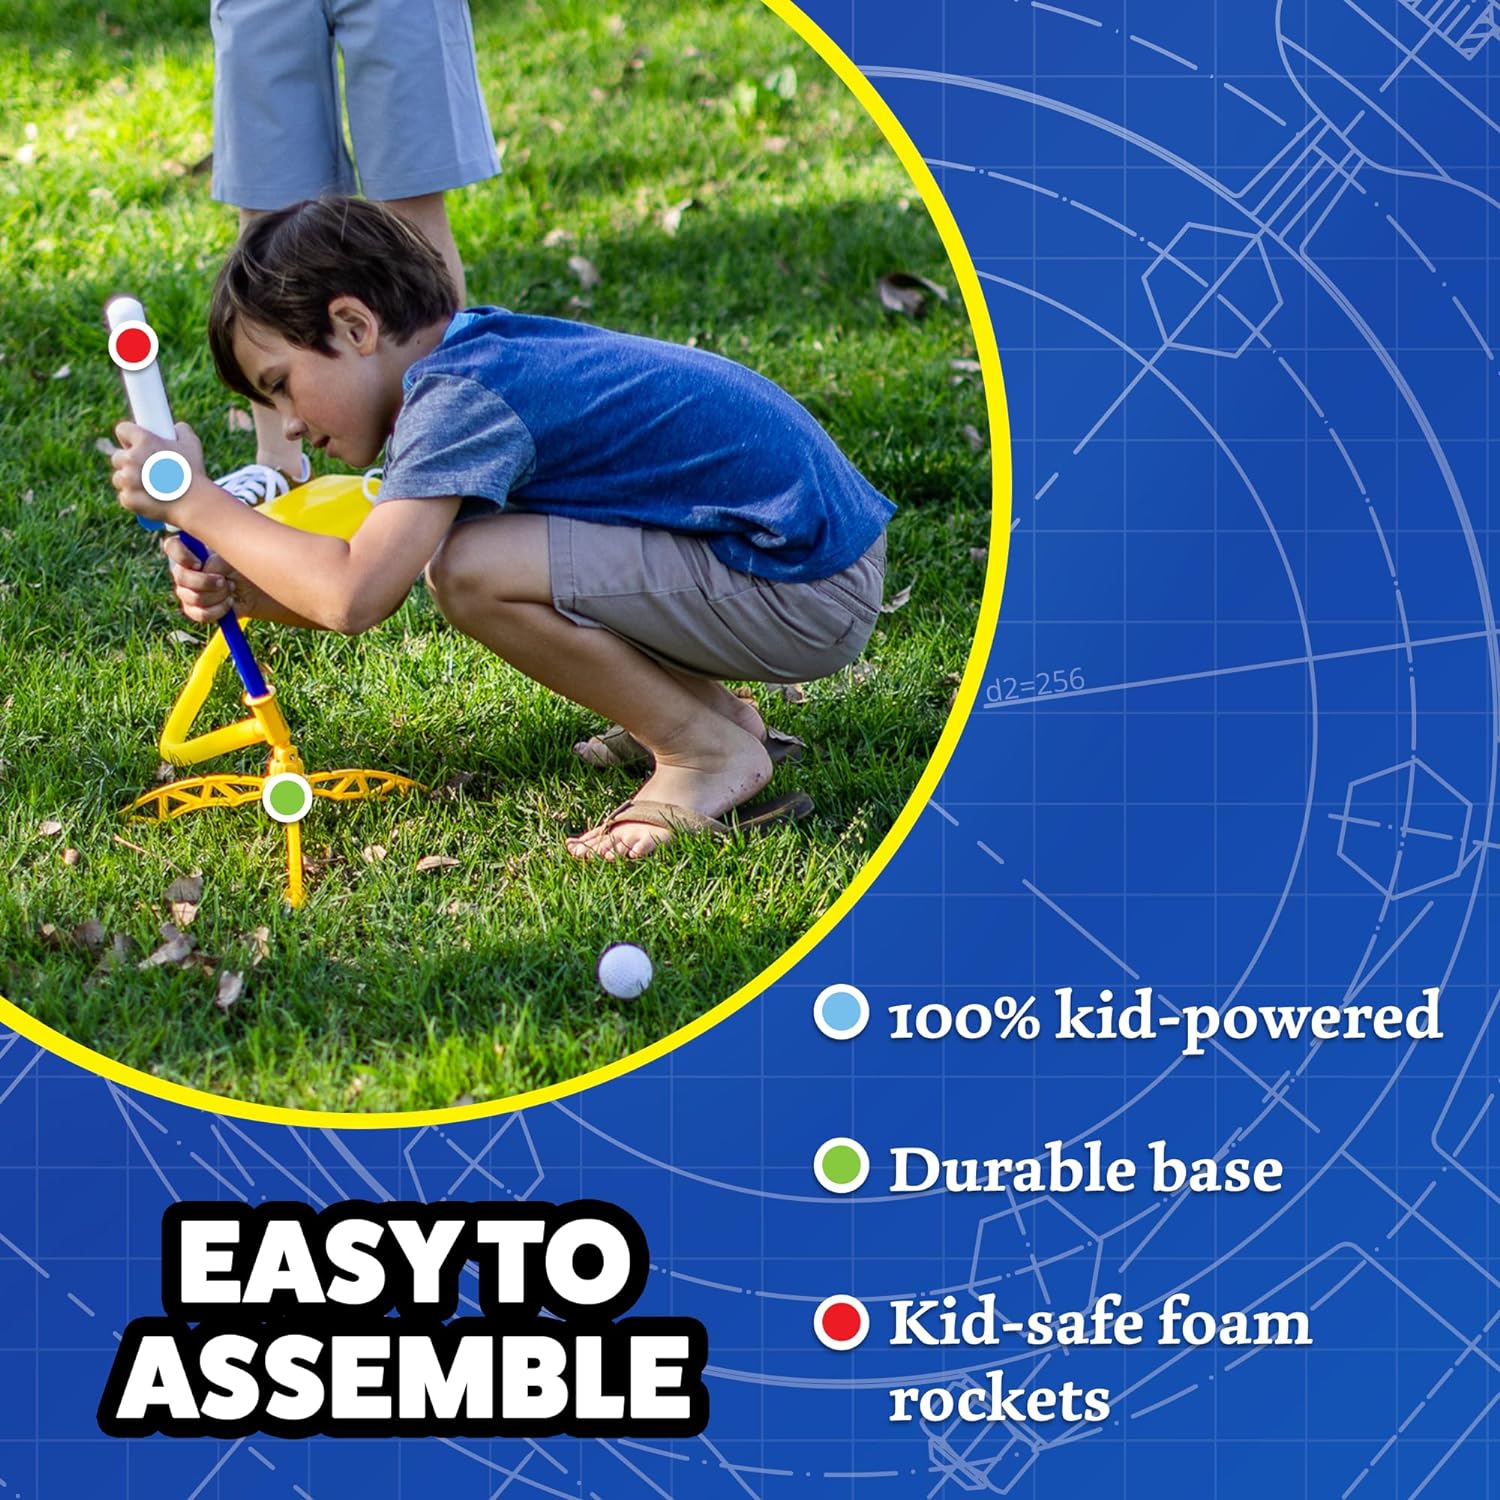 Stomp Rocket® Original Jr. Glow Rocket Launcher for Kids, Soars up to 100 Ft, 4 Foam Rockets and Adjustable Launcher, Gift for Boys and Girls Ages 3 Years and up - image 5 of 7